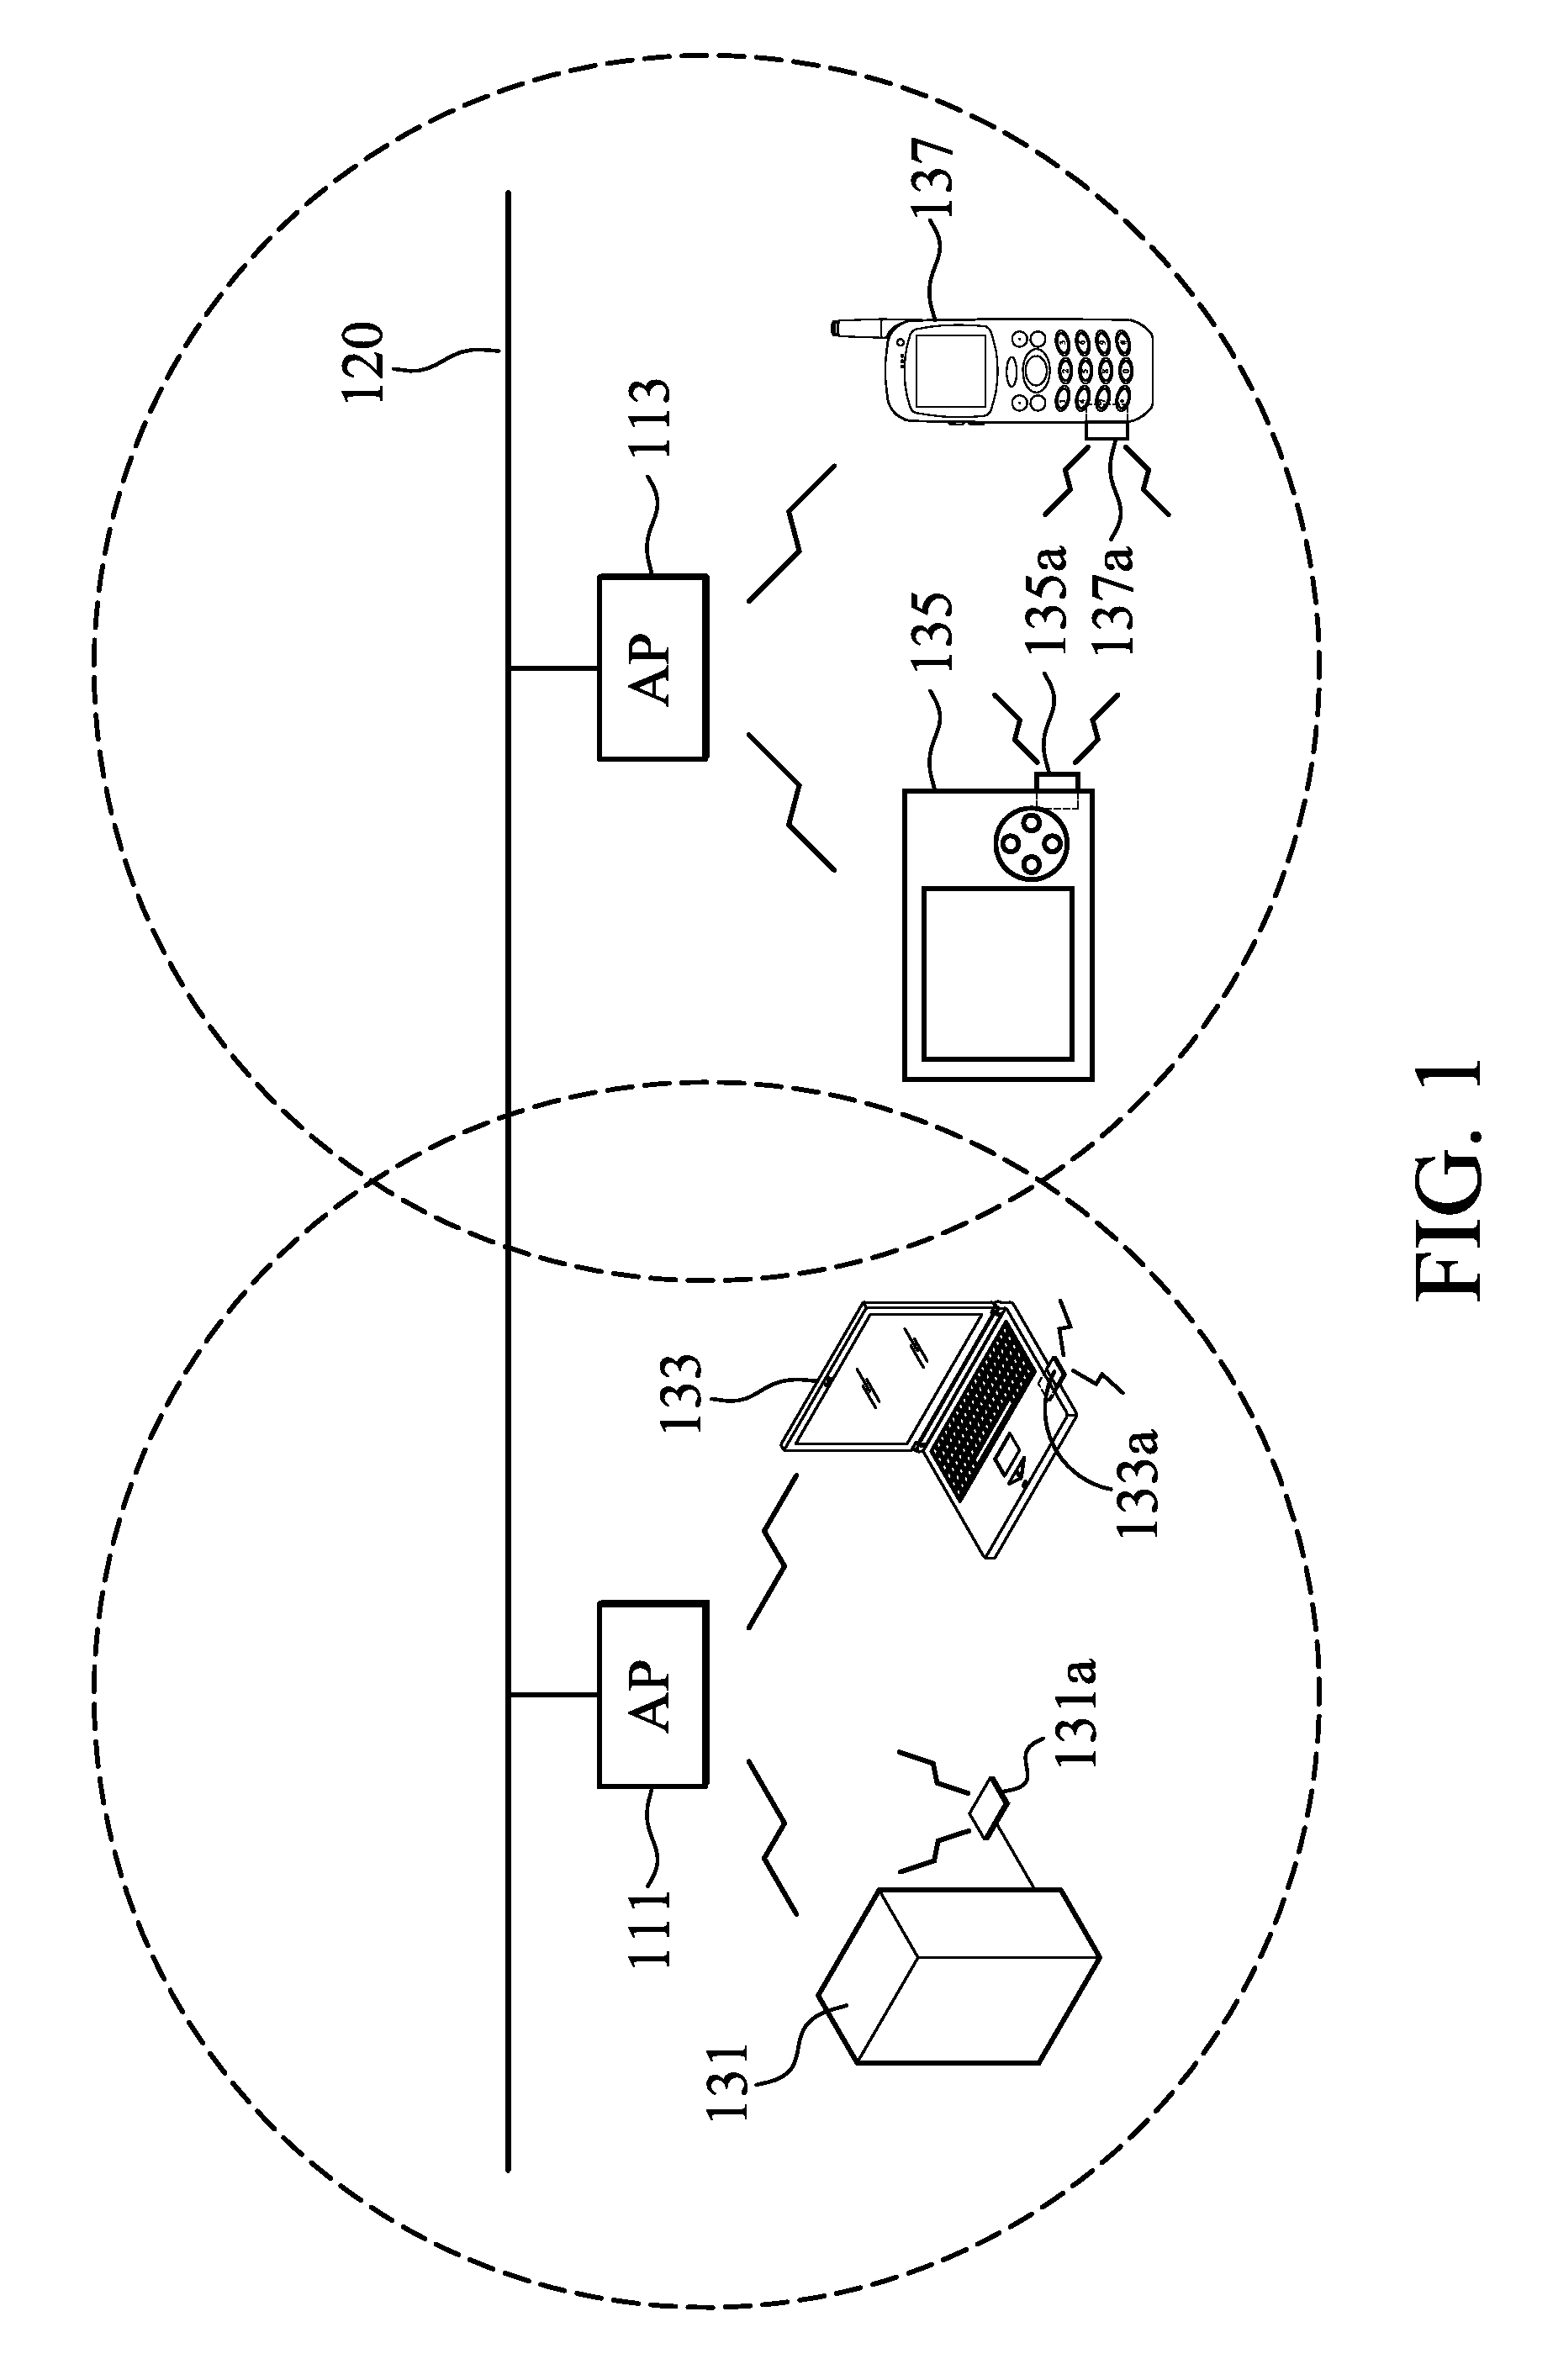 Systems for wireless local area network (WLAN) transmission and for coexistence of WLAN and another type of wireless transmission and methods thereof